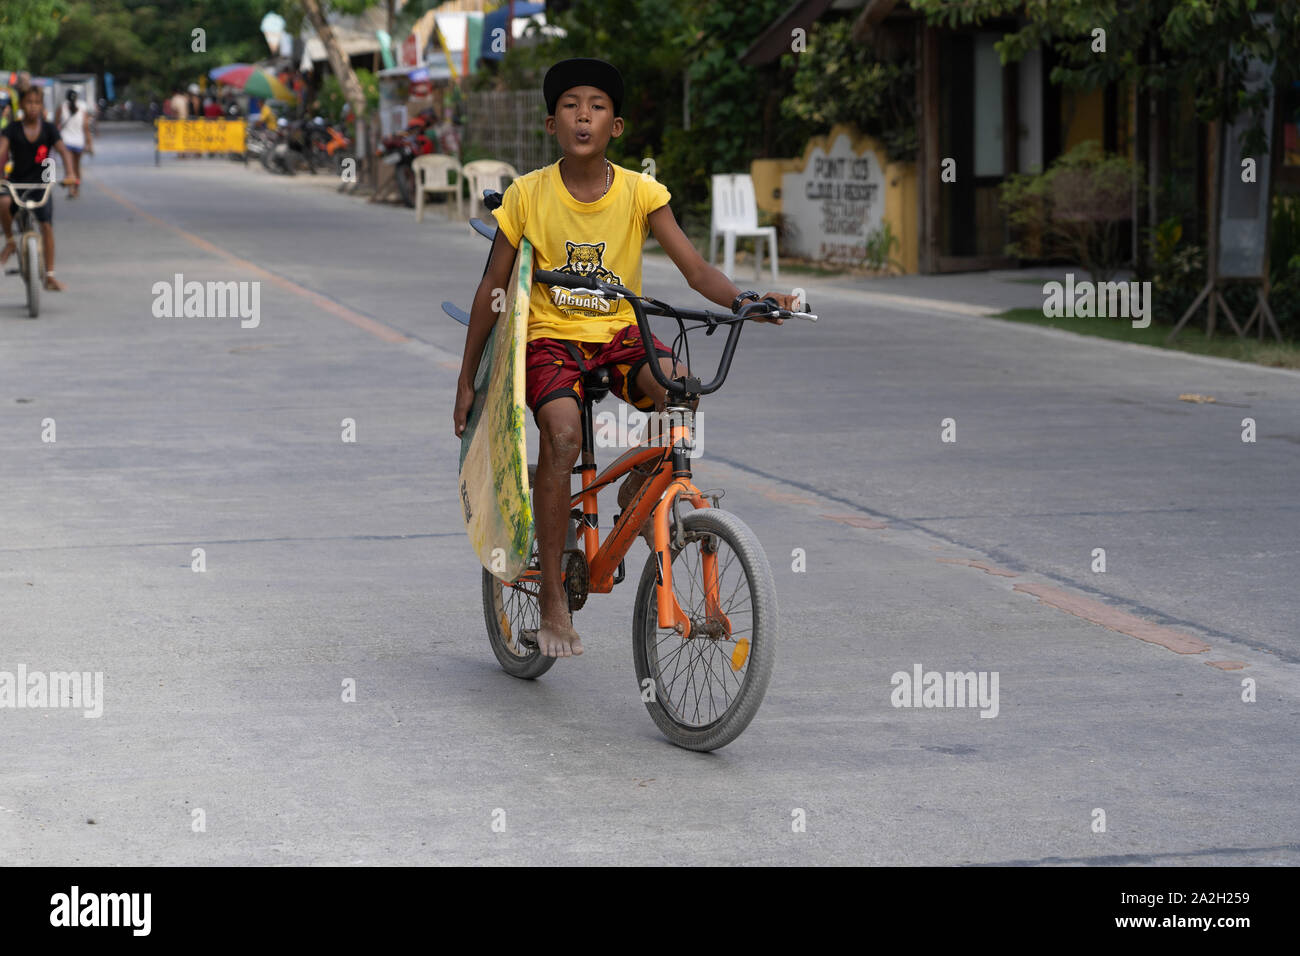 A young boy carrying a surfboard whilst riding a pedal cycle,Siargao,Philippines Stock Photo